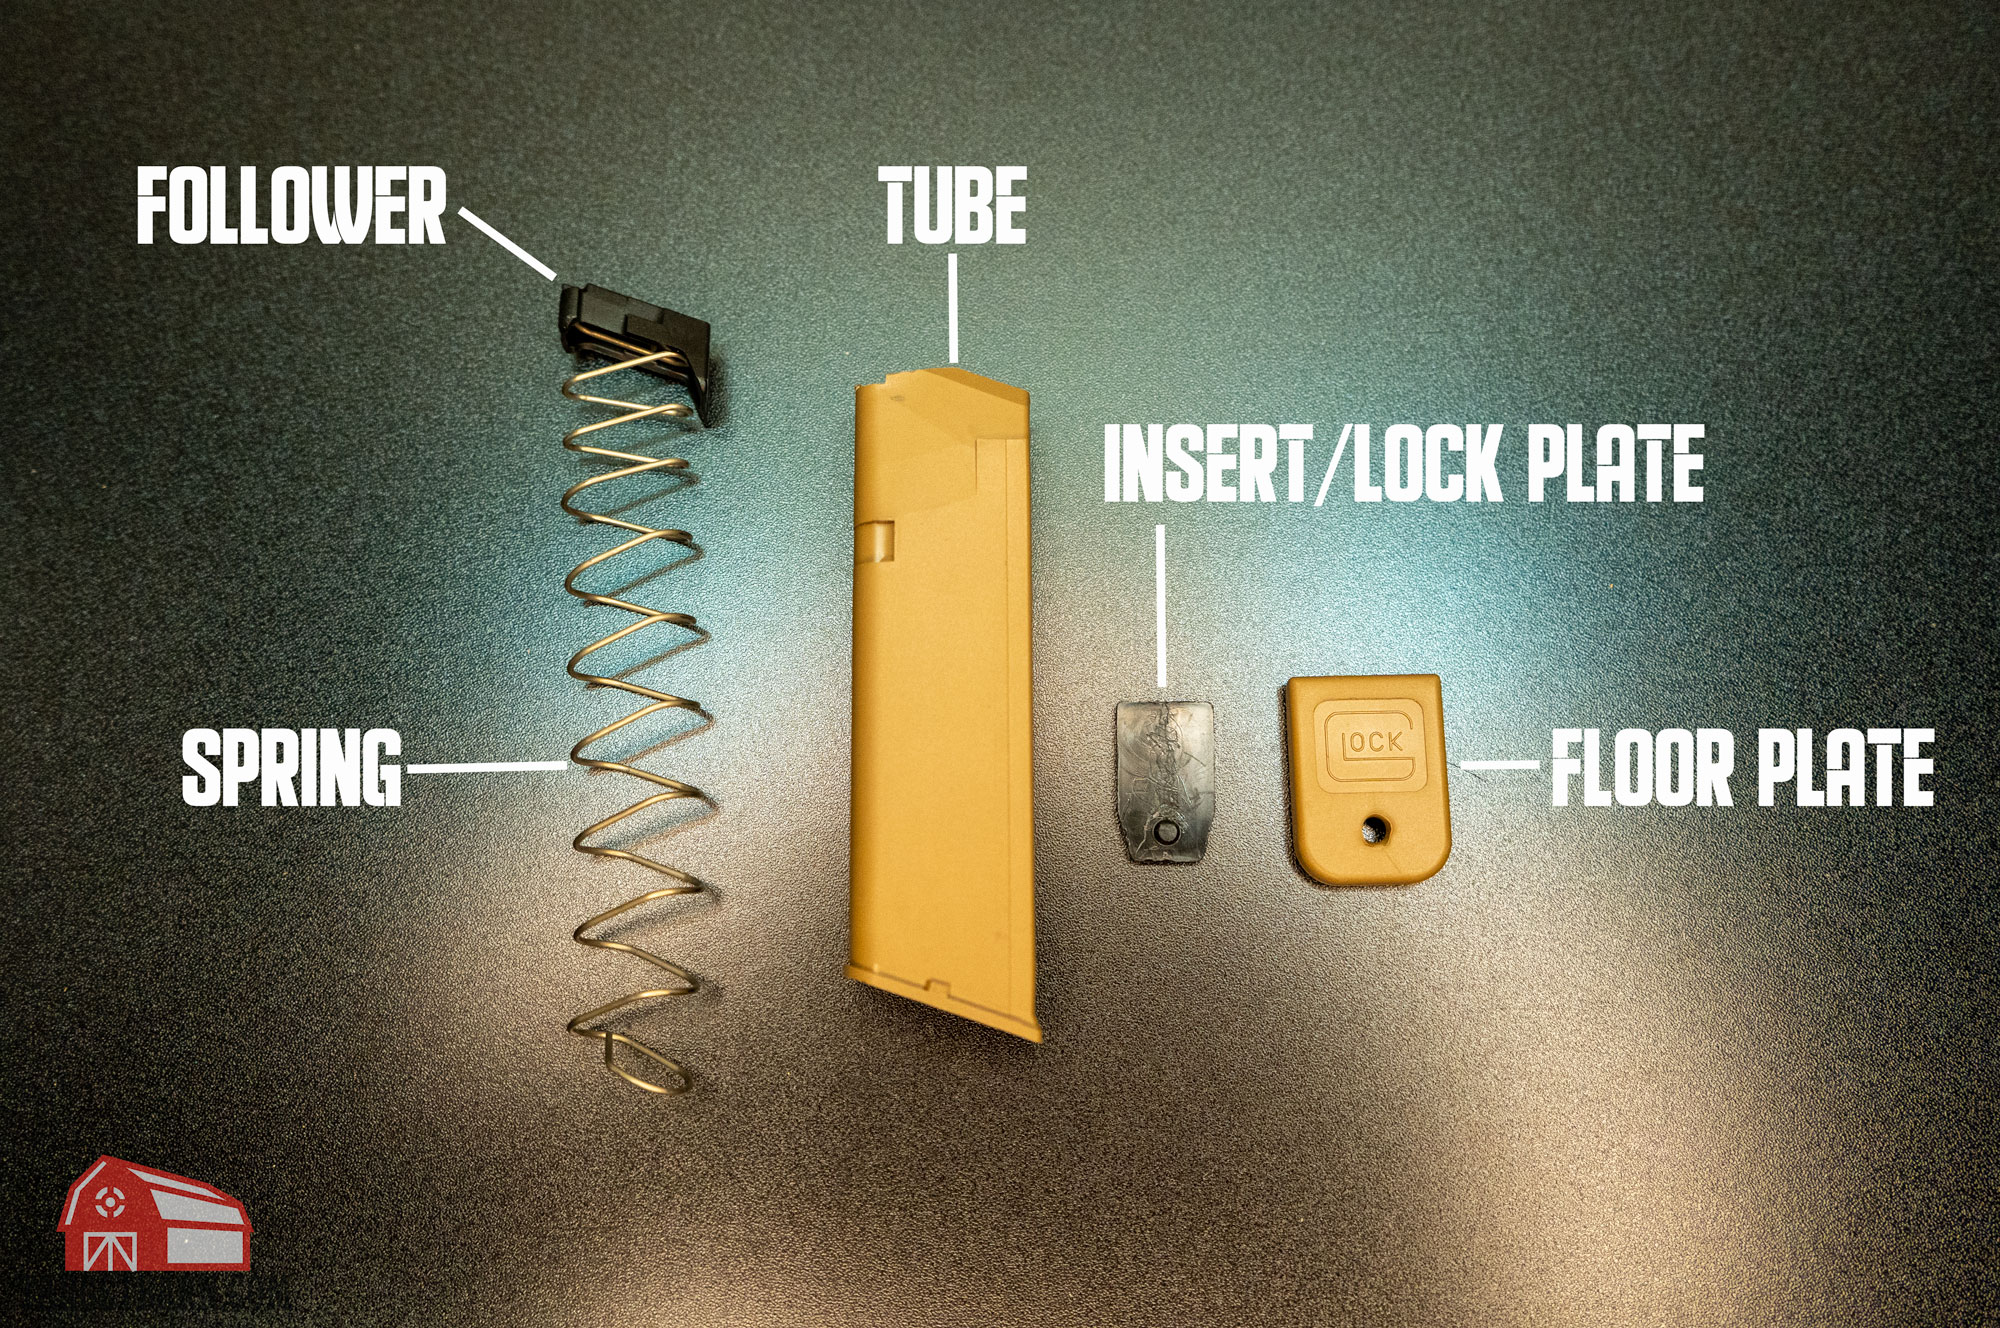 a diagram of the parts of a glock magazine showing the follower, spring, tube, insert/lock plate, and floor plate